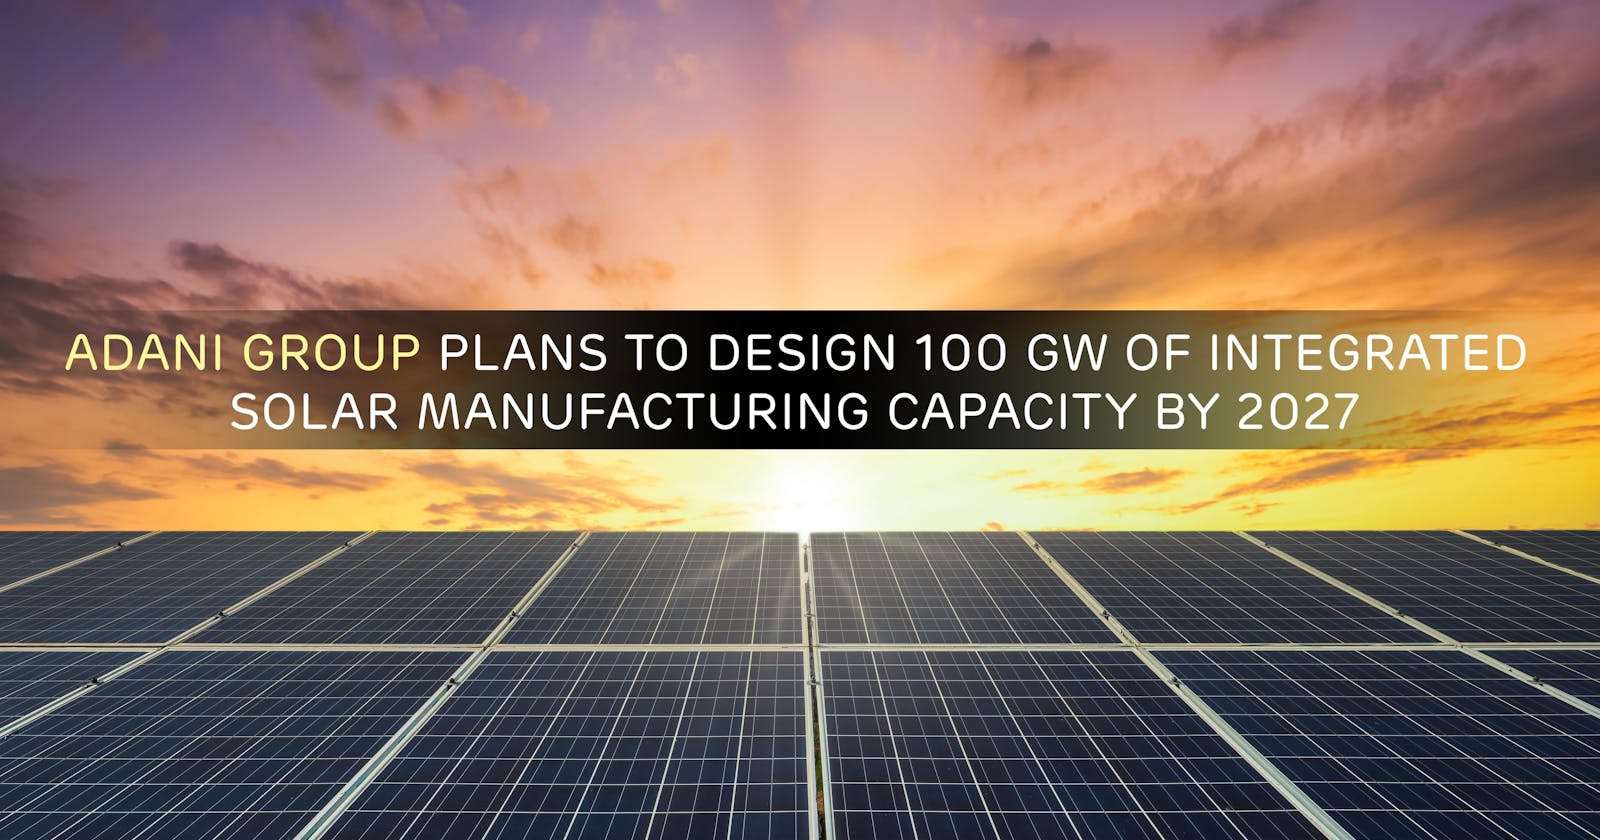 Adani Group Plans to Design 100 GW of Integrated Solar Manufacturing Capacity by 2027